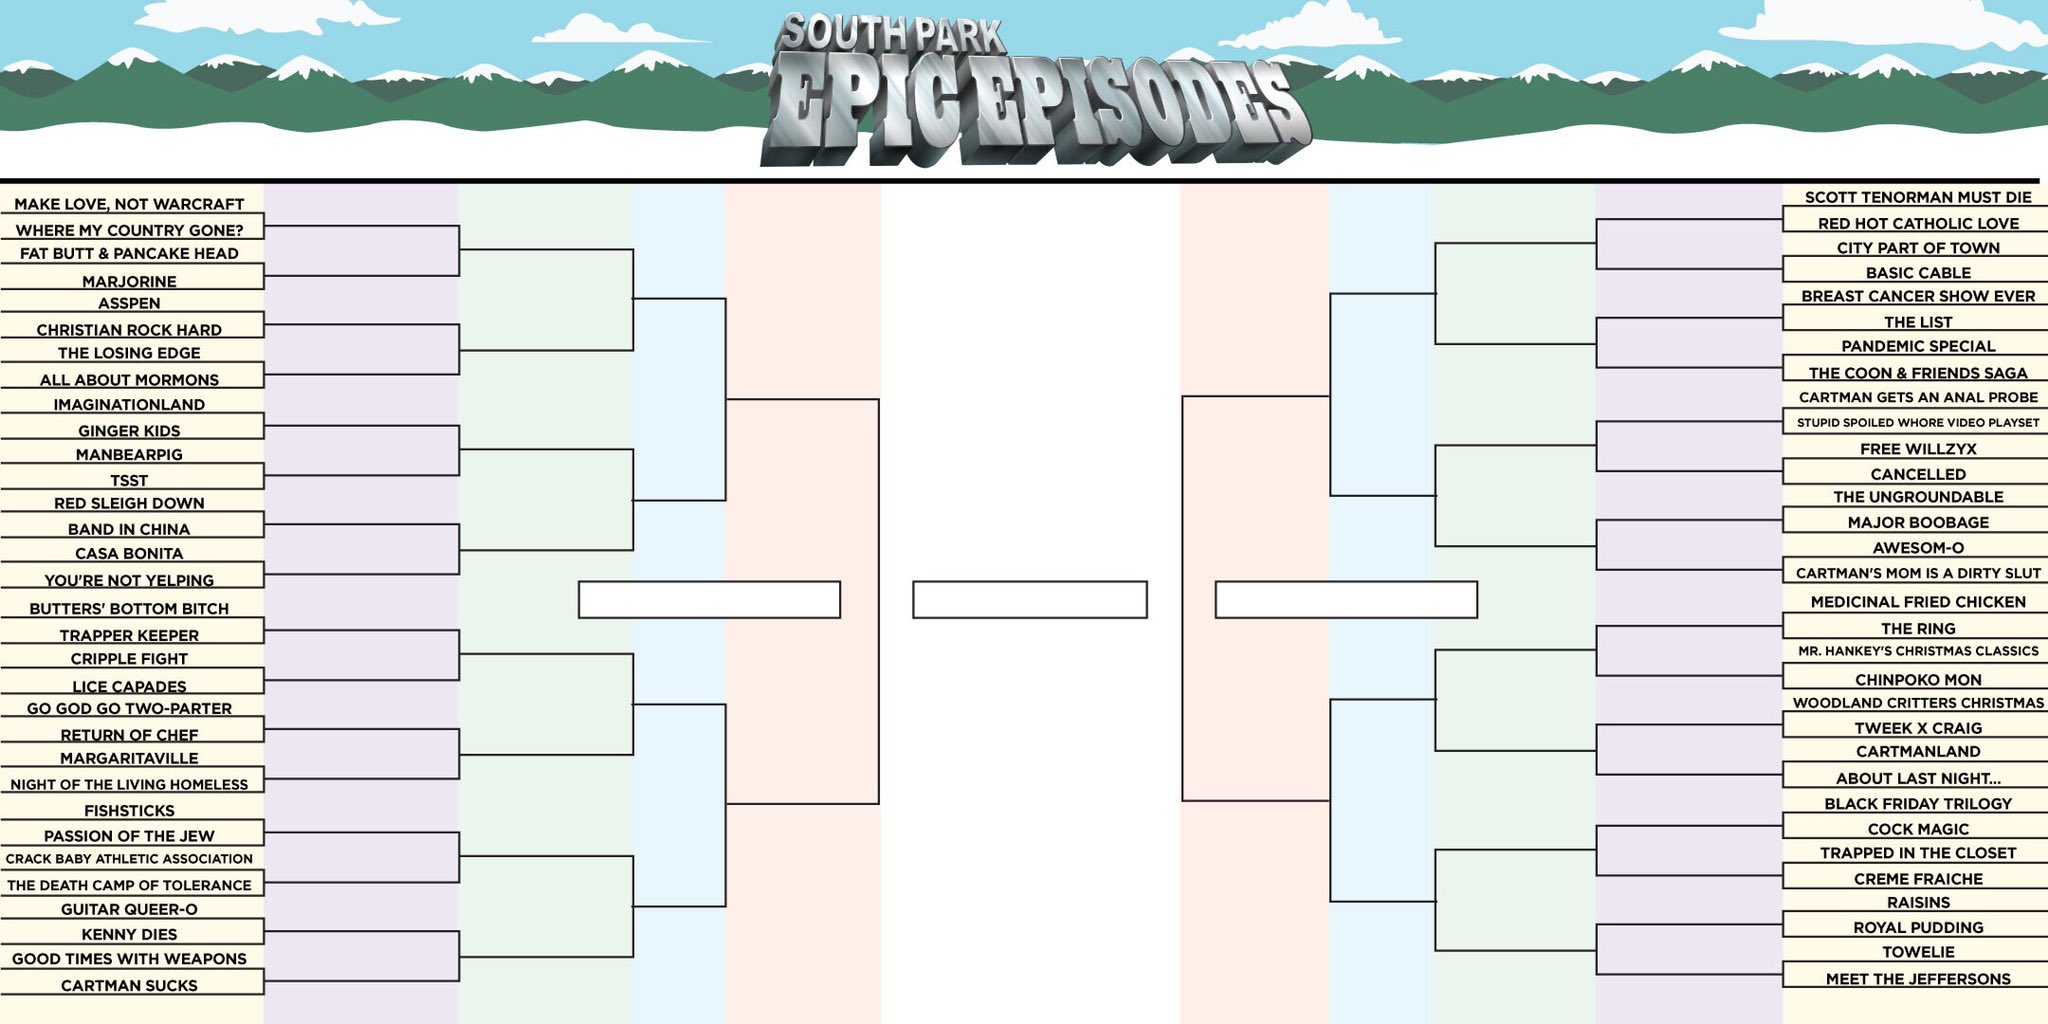 South Twitter: "The South Park Epic Episodes tournament begins today! Vote your favorite episodes in this thread https://t.co/JRr4twCgVt" / Twitter